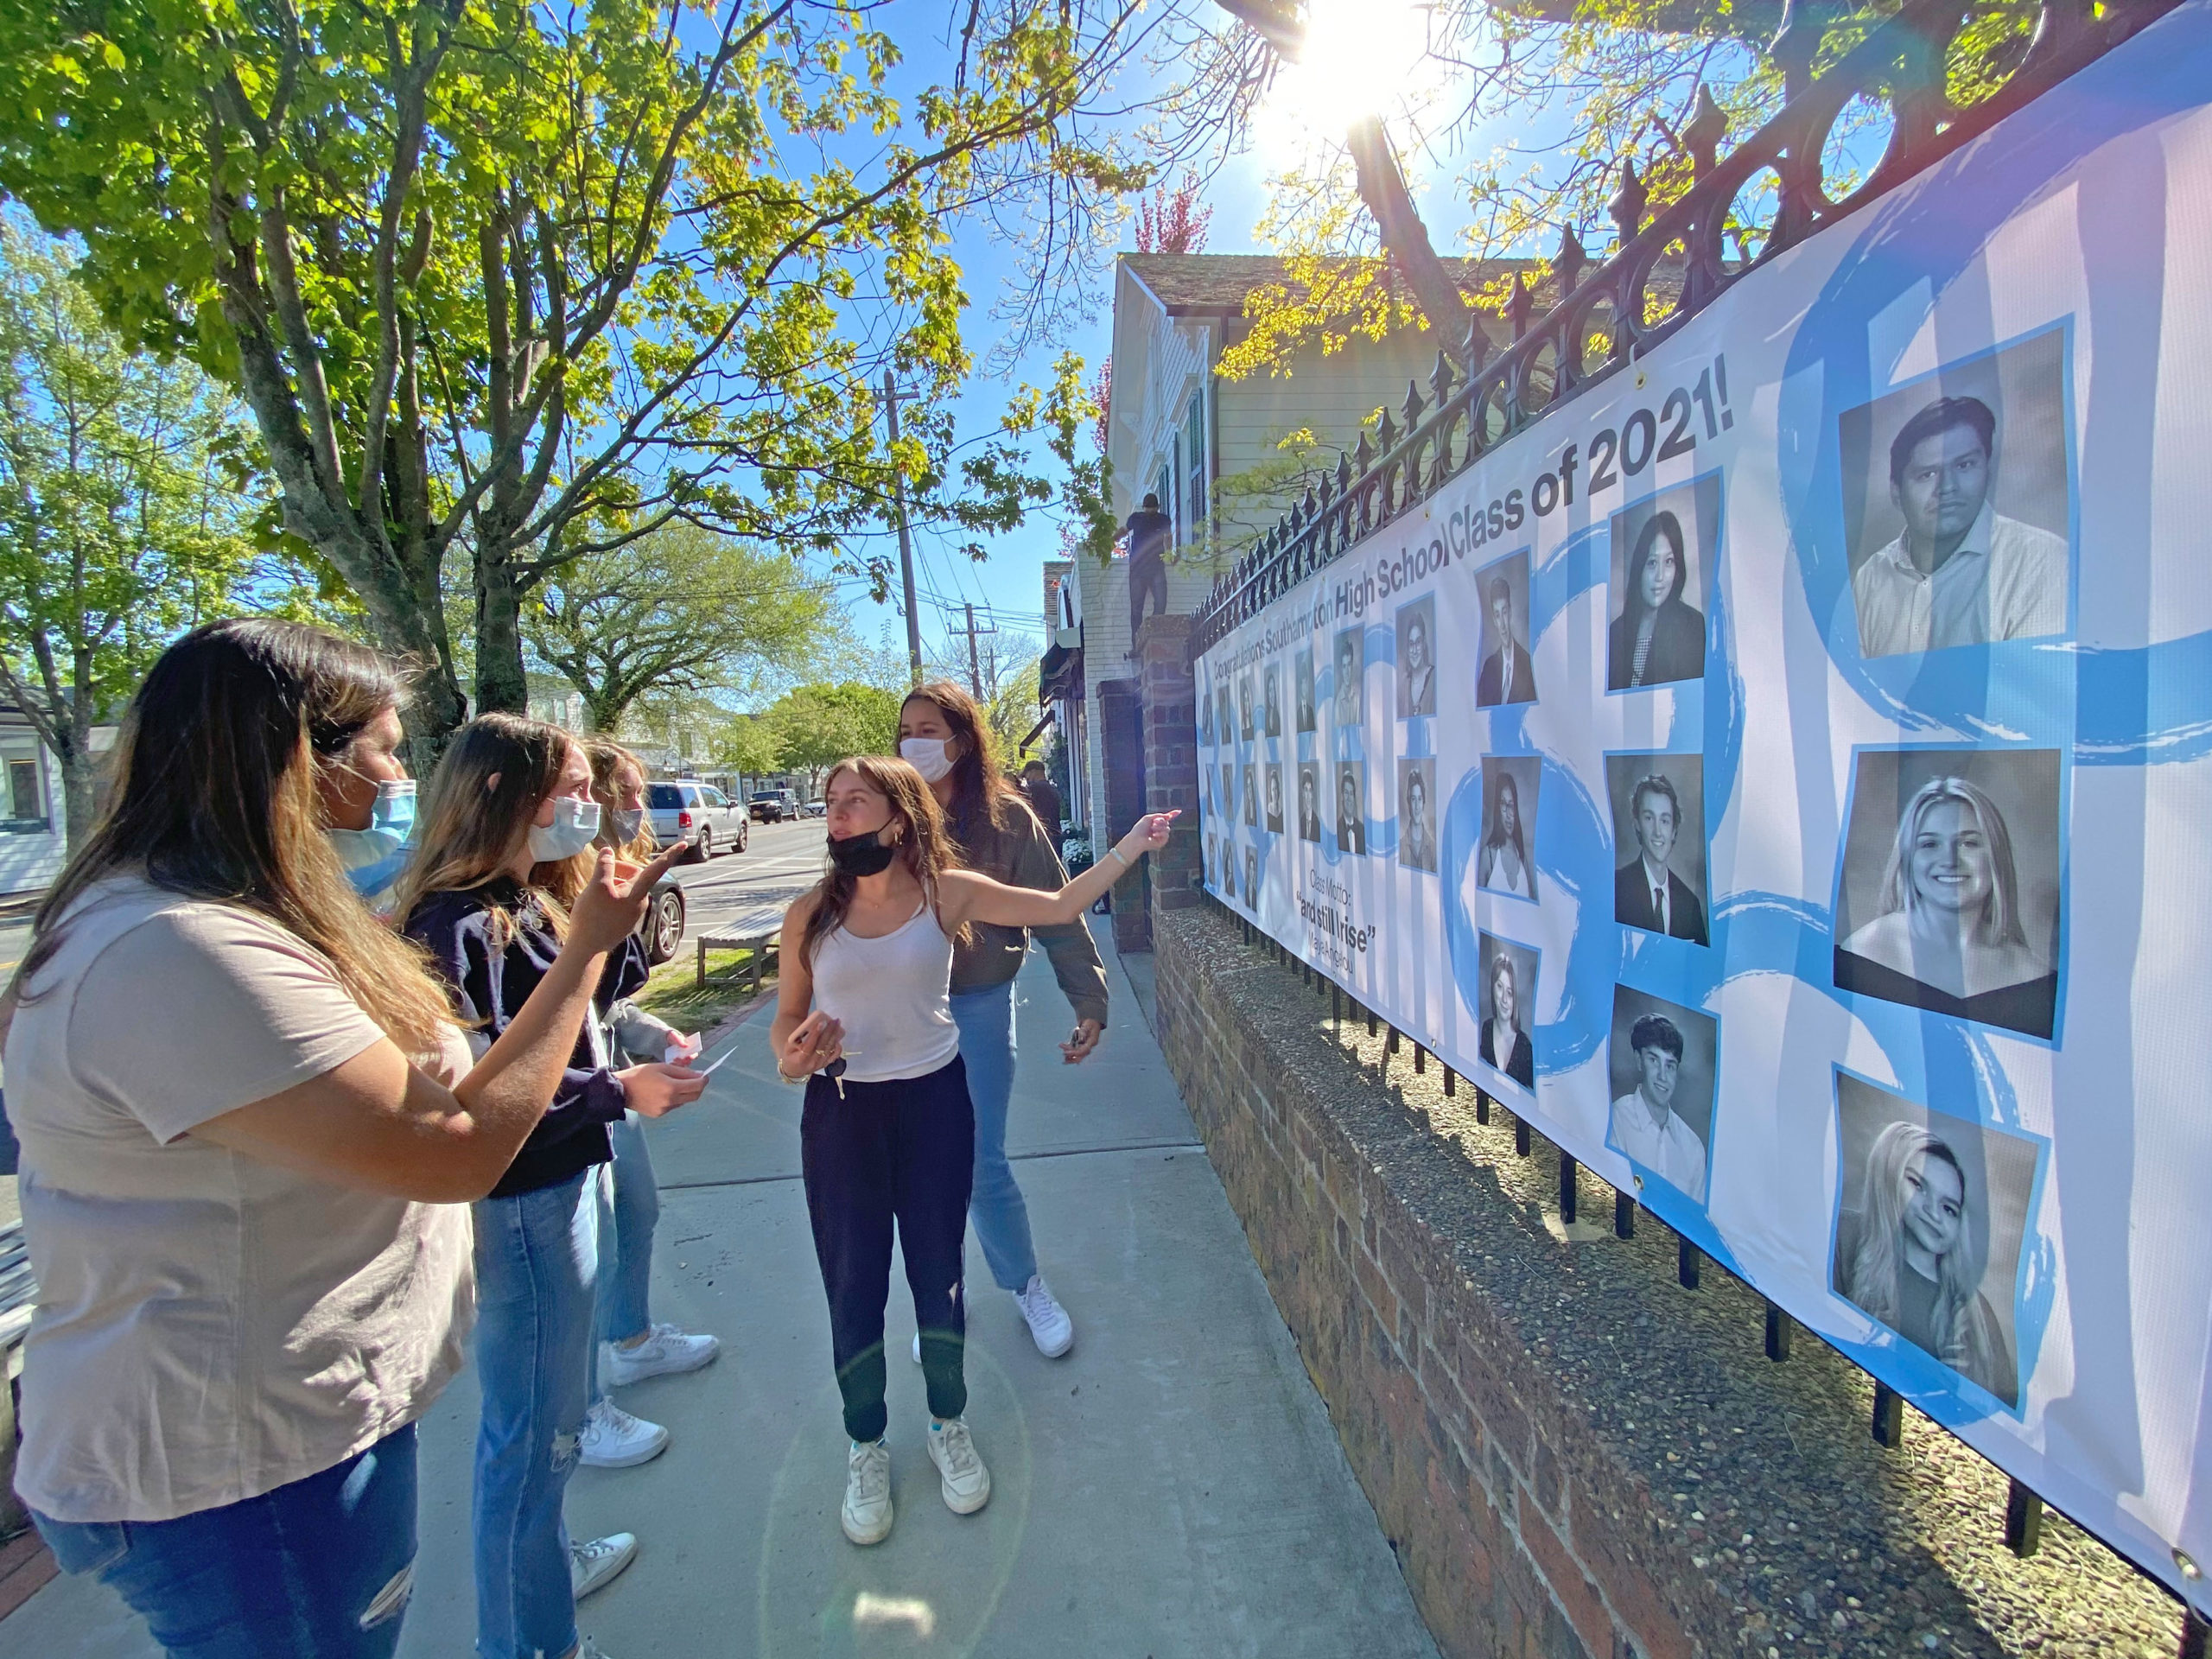 Southampton High School  Seniors look for their photo on banners in front of the Southampton Arts Center on Friday afternoon. The Southampton Arts Center will unveiled the banner honoring Southampton High School graduating seniors as part of a second annual event to acknowledge the accomplishments and resilience of the students. Beginning in 2020 in the height of the COVID-19 pandemic, the banner was conceived as a way to honor Southampton graduates, featuring photos of all of the graduating seniors and the class motto, “And still I rise.”     DANA SHAW